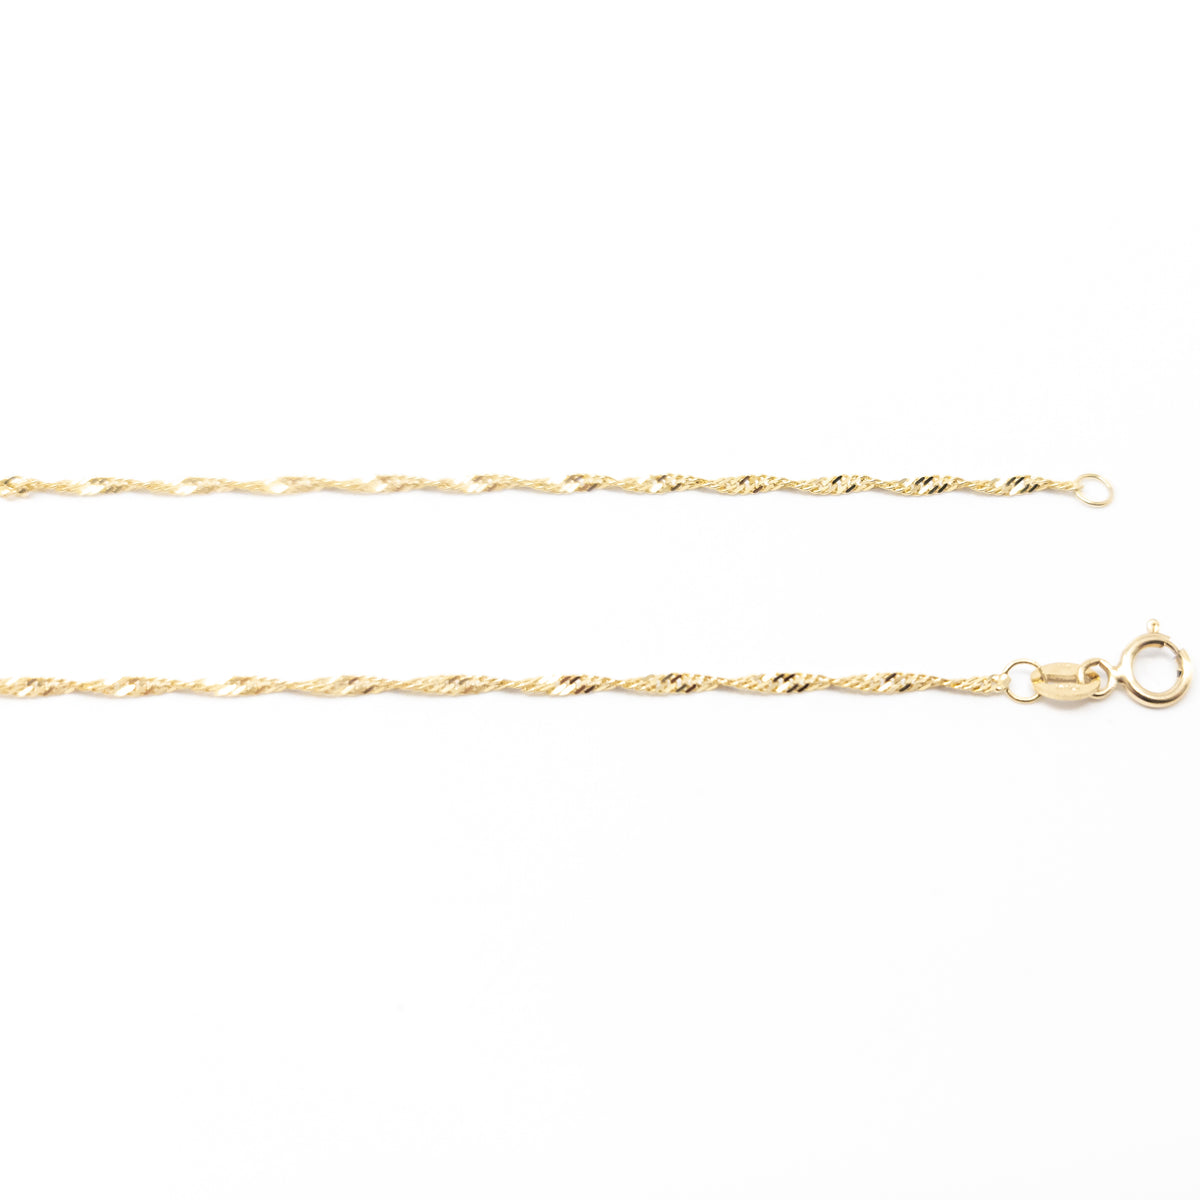 10K Gold Singapore Chain with Spring Clasp - 1 mm